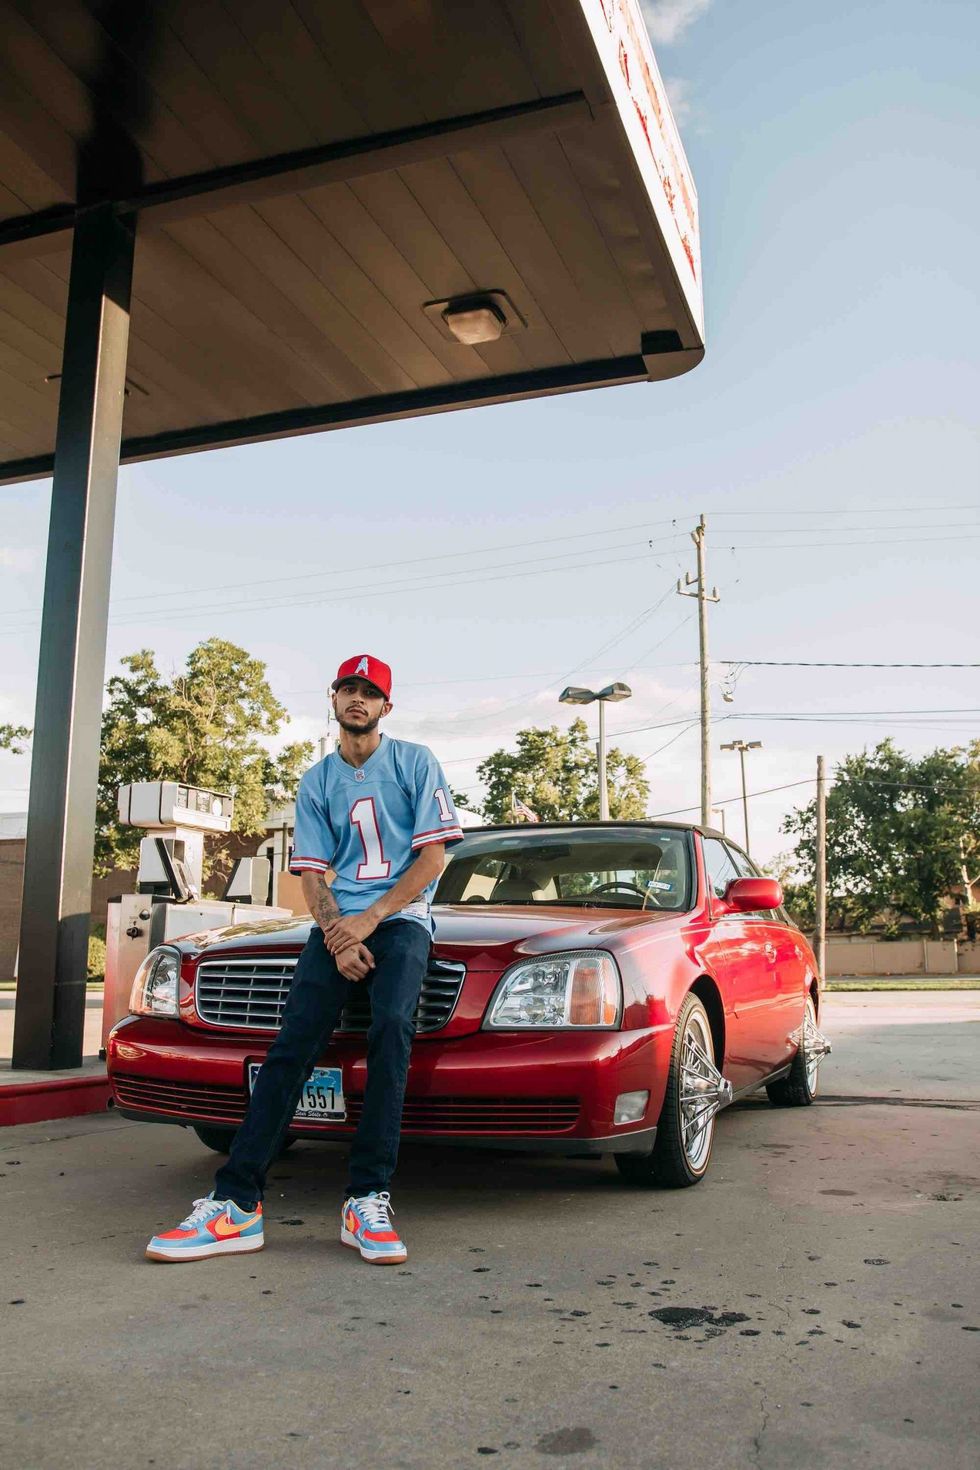 Despite Rising Gas Prices Houston’s Slab Culture Continues to Ride on